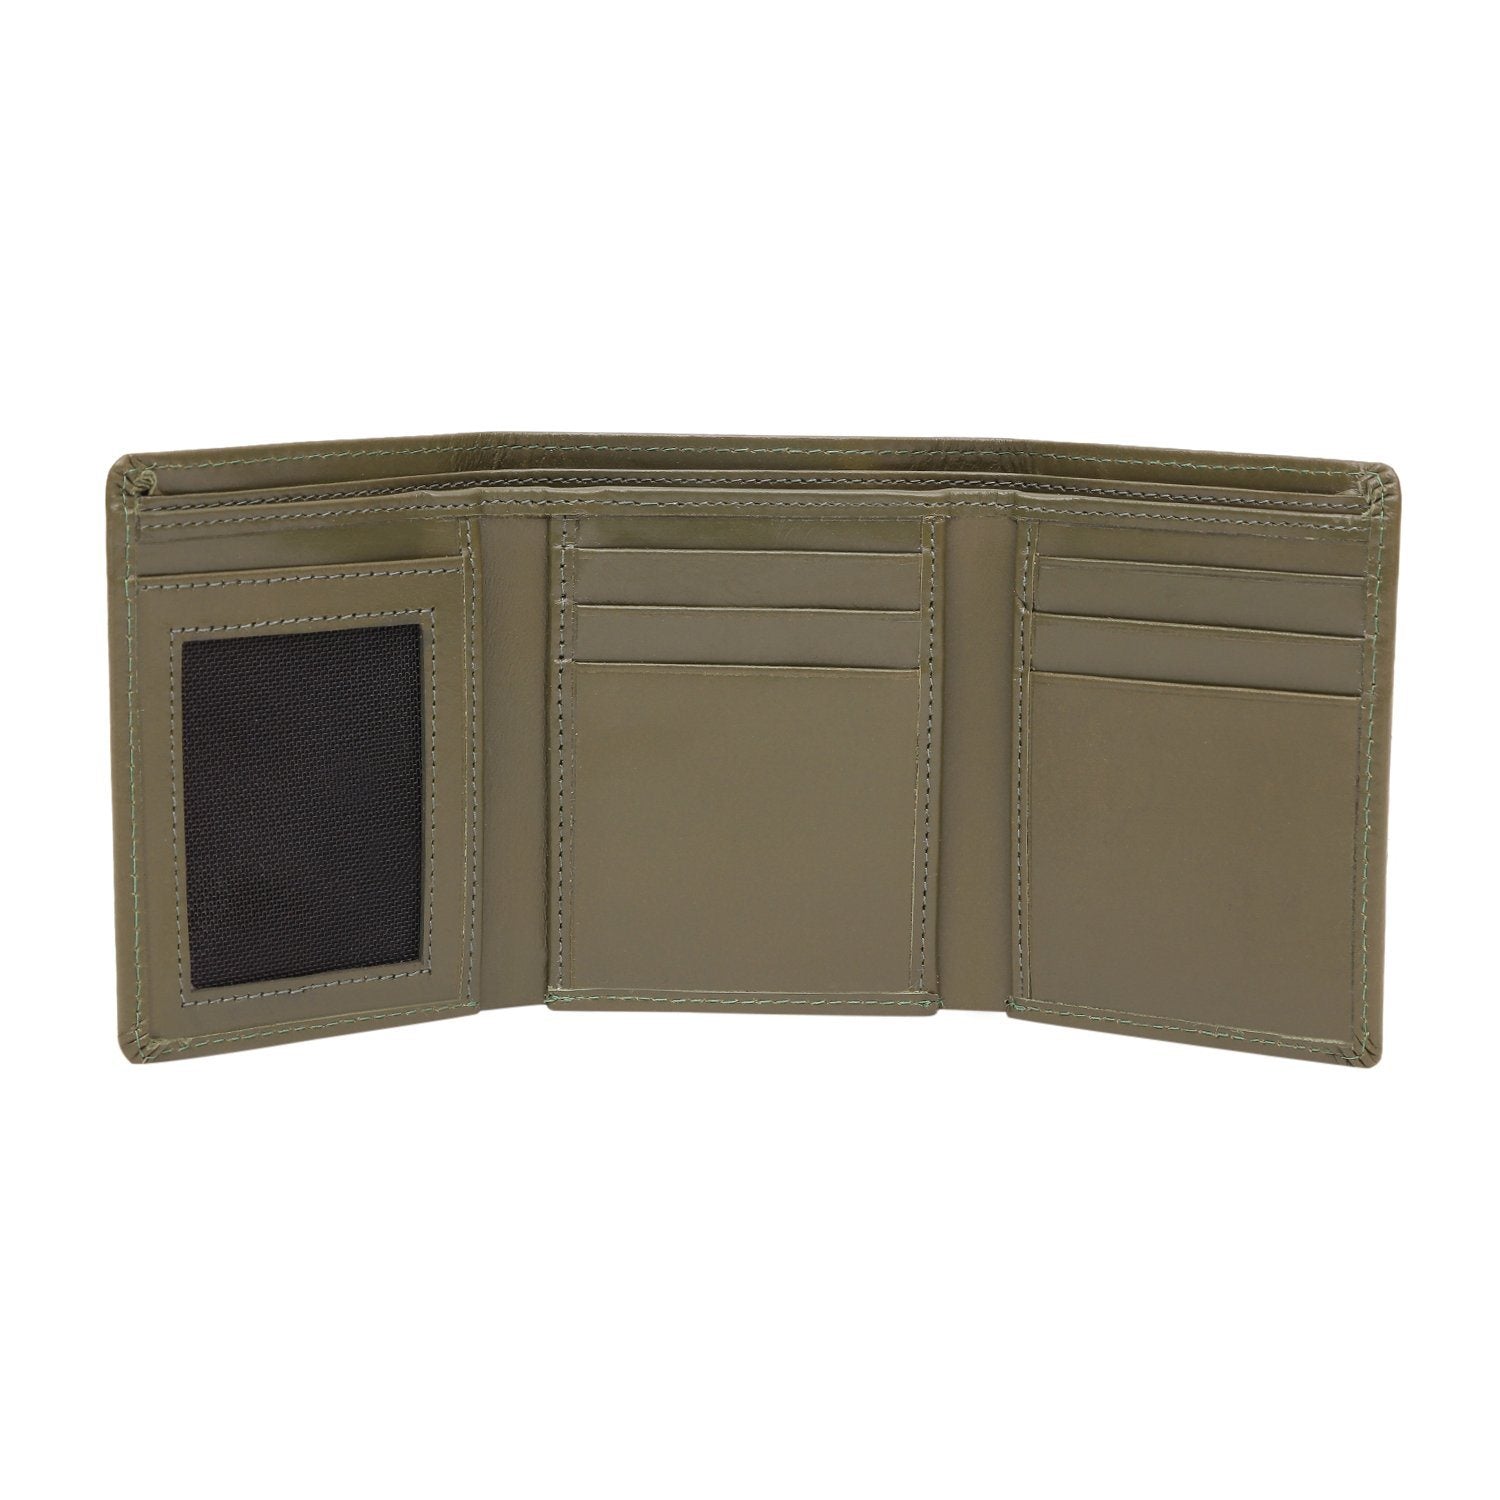 Olive Colour Tri-Fold Italian Leather Slim Wallet (6 Card Slot +2 Hidden Compartment + 1 ID Slot + Cash Compartment) Cathy London 